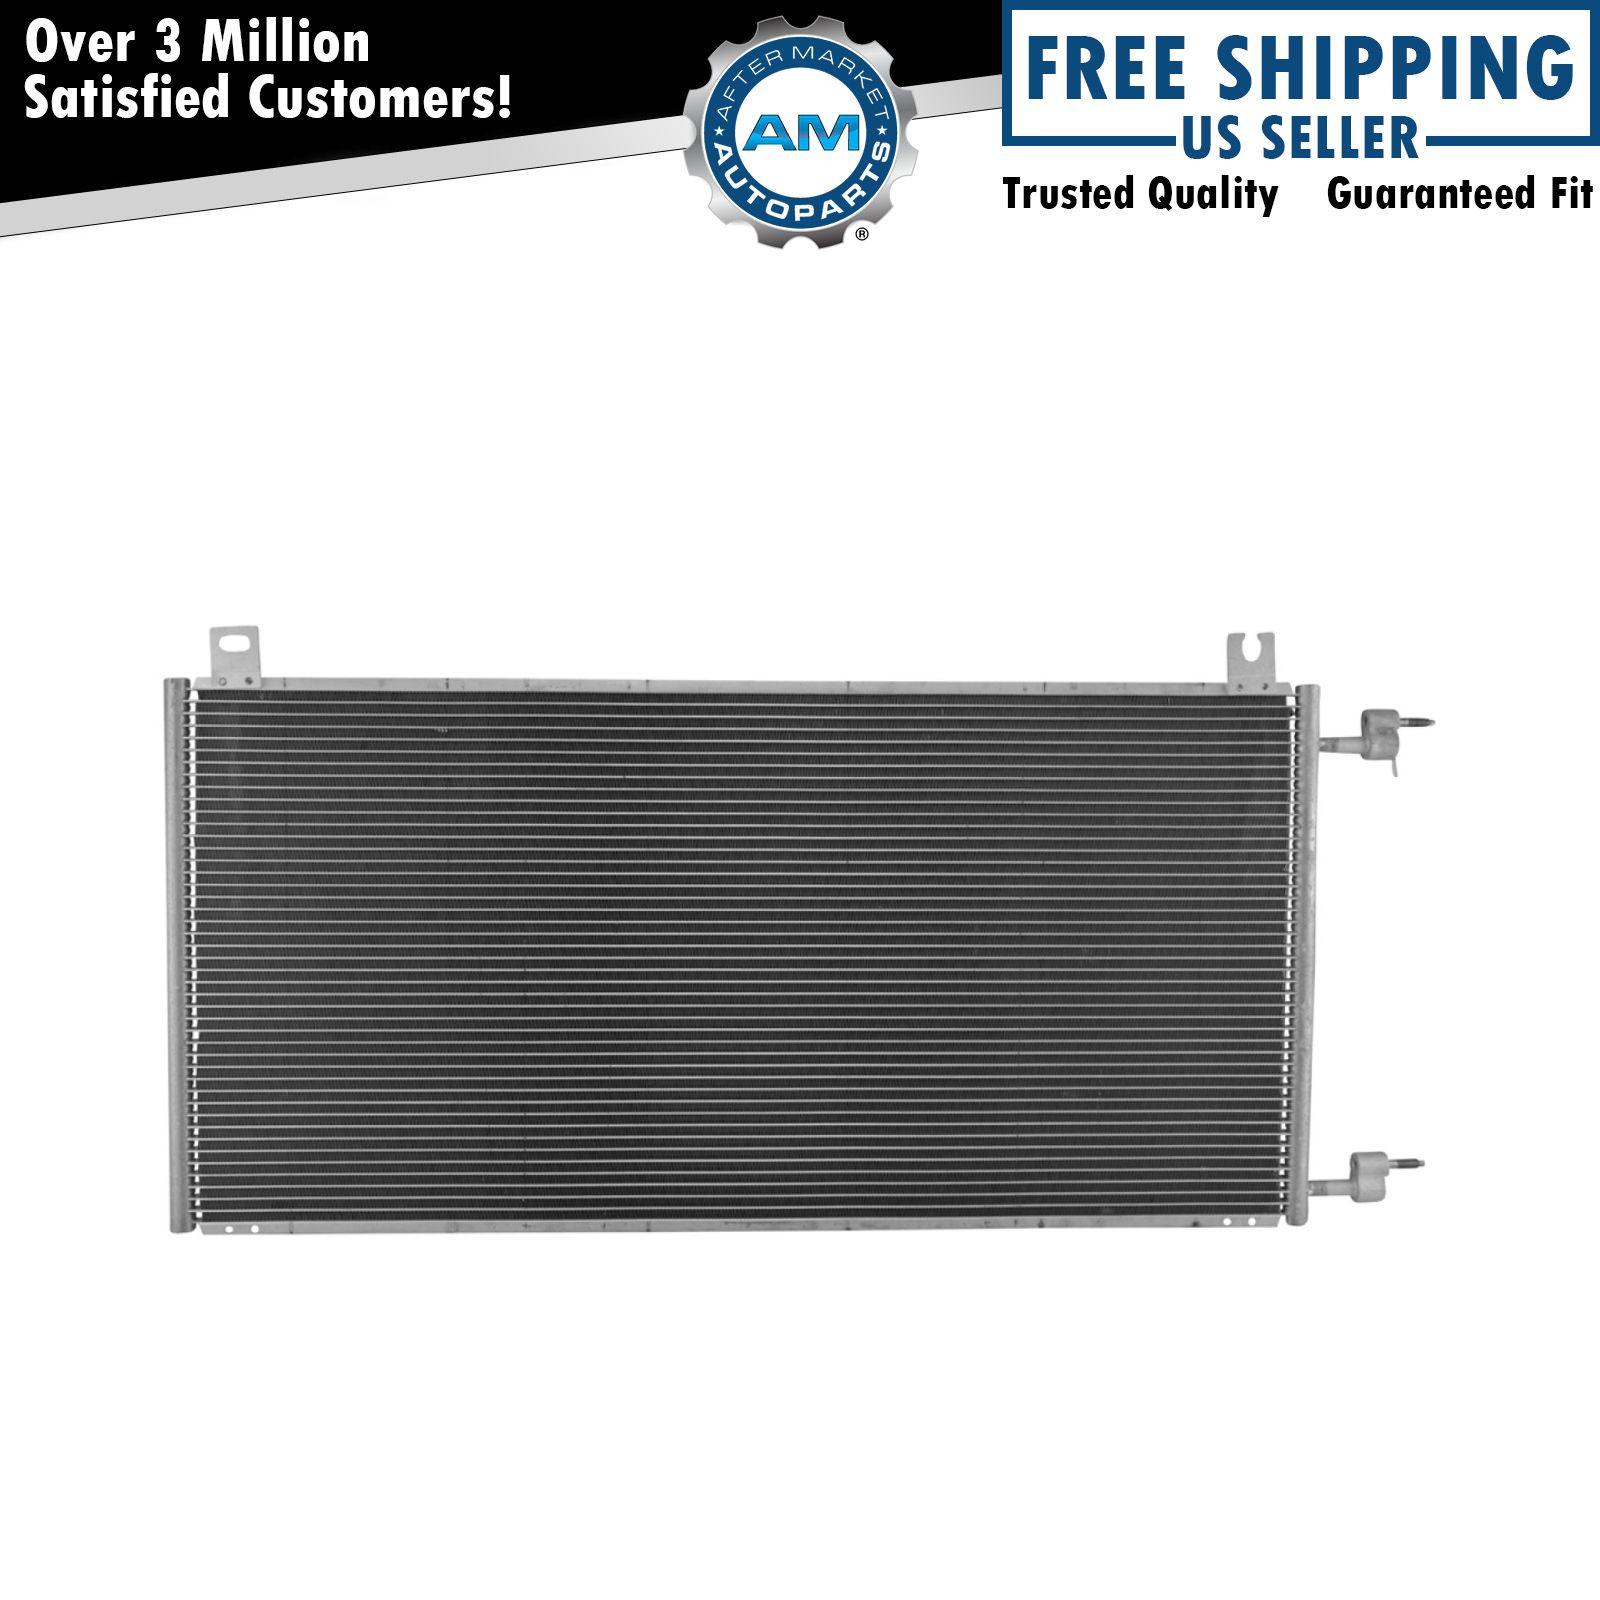 AC Condenser A/C Air Conditioning for Chevrolet GMC GM Pickup Truck SUV New